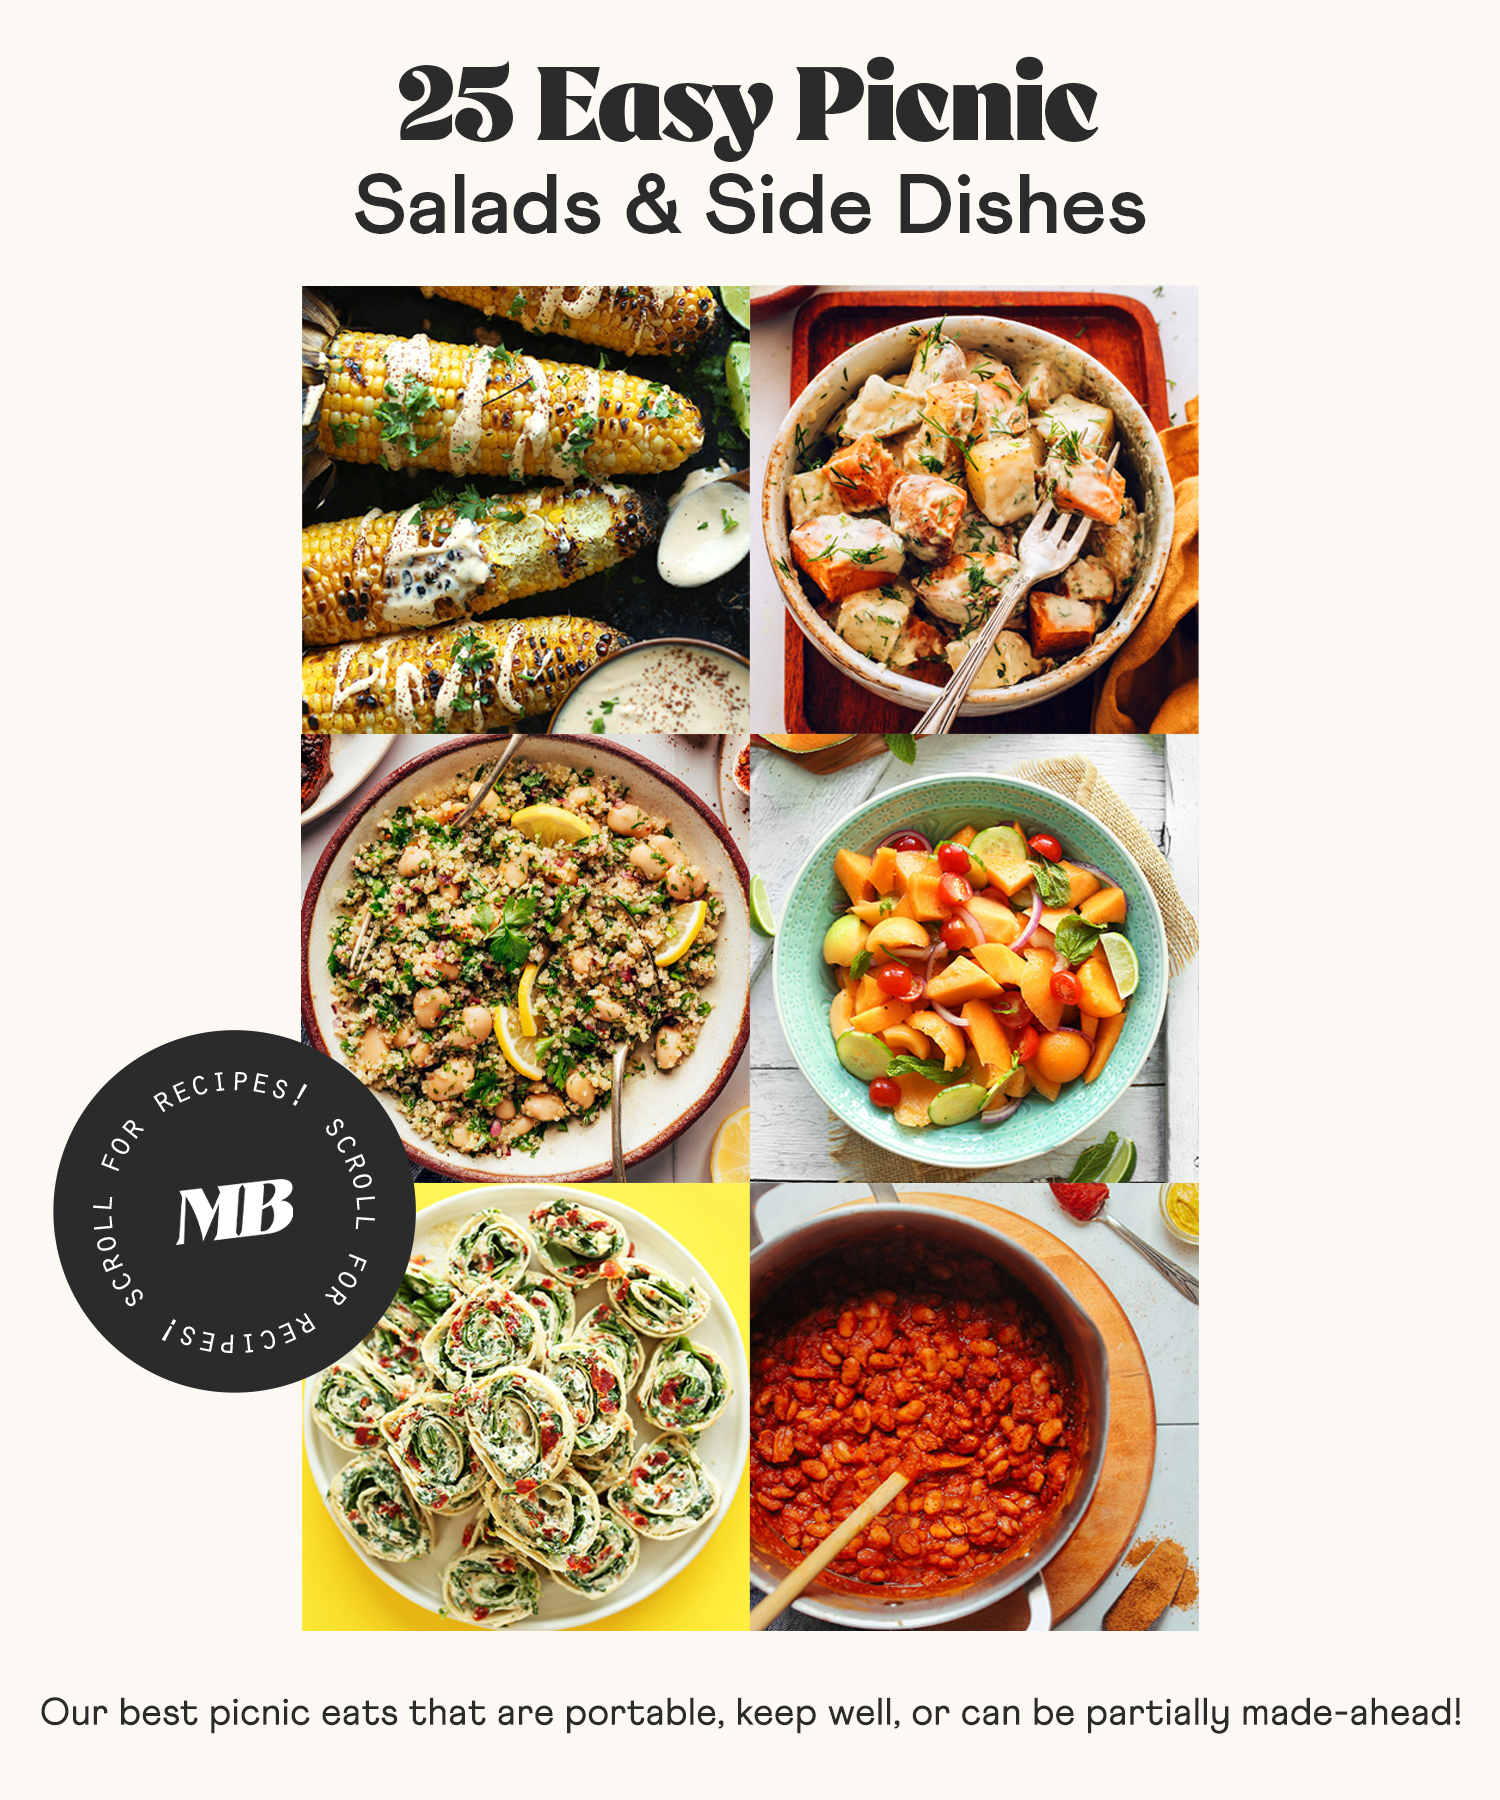 Salads, grilled corn, beans, and other easy picnic salads and side dishes